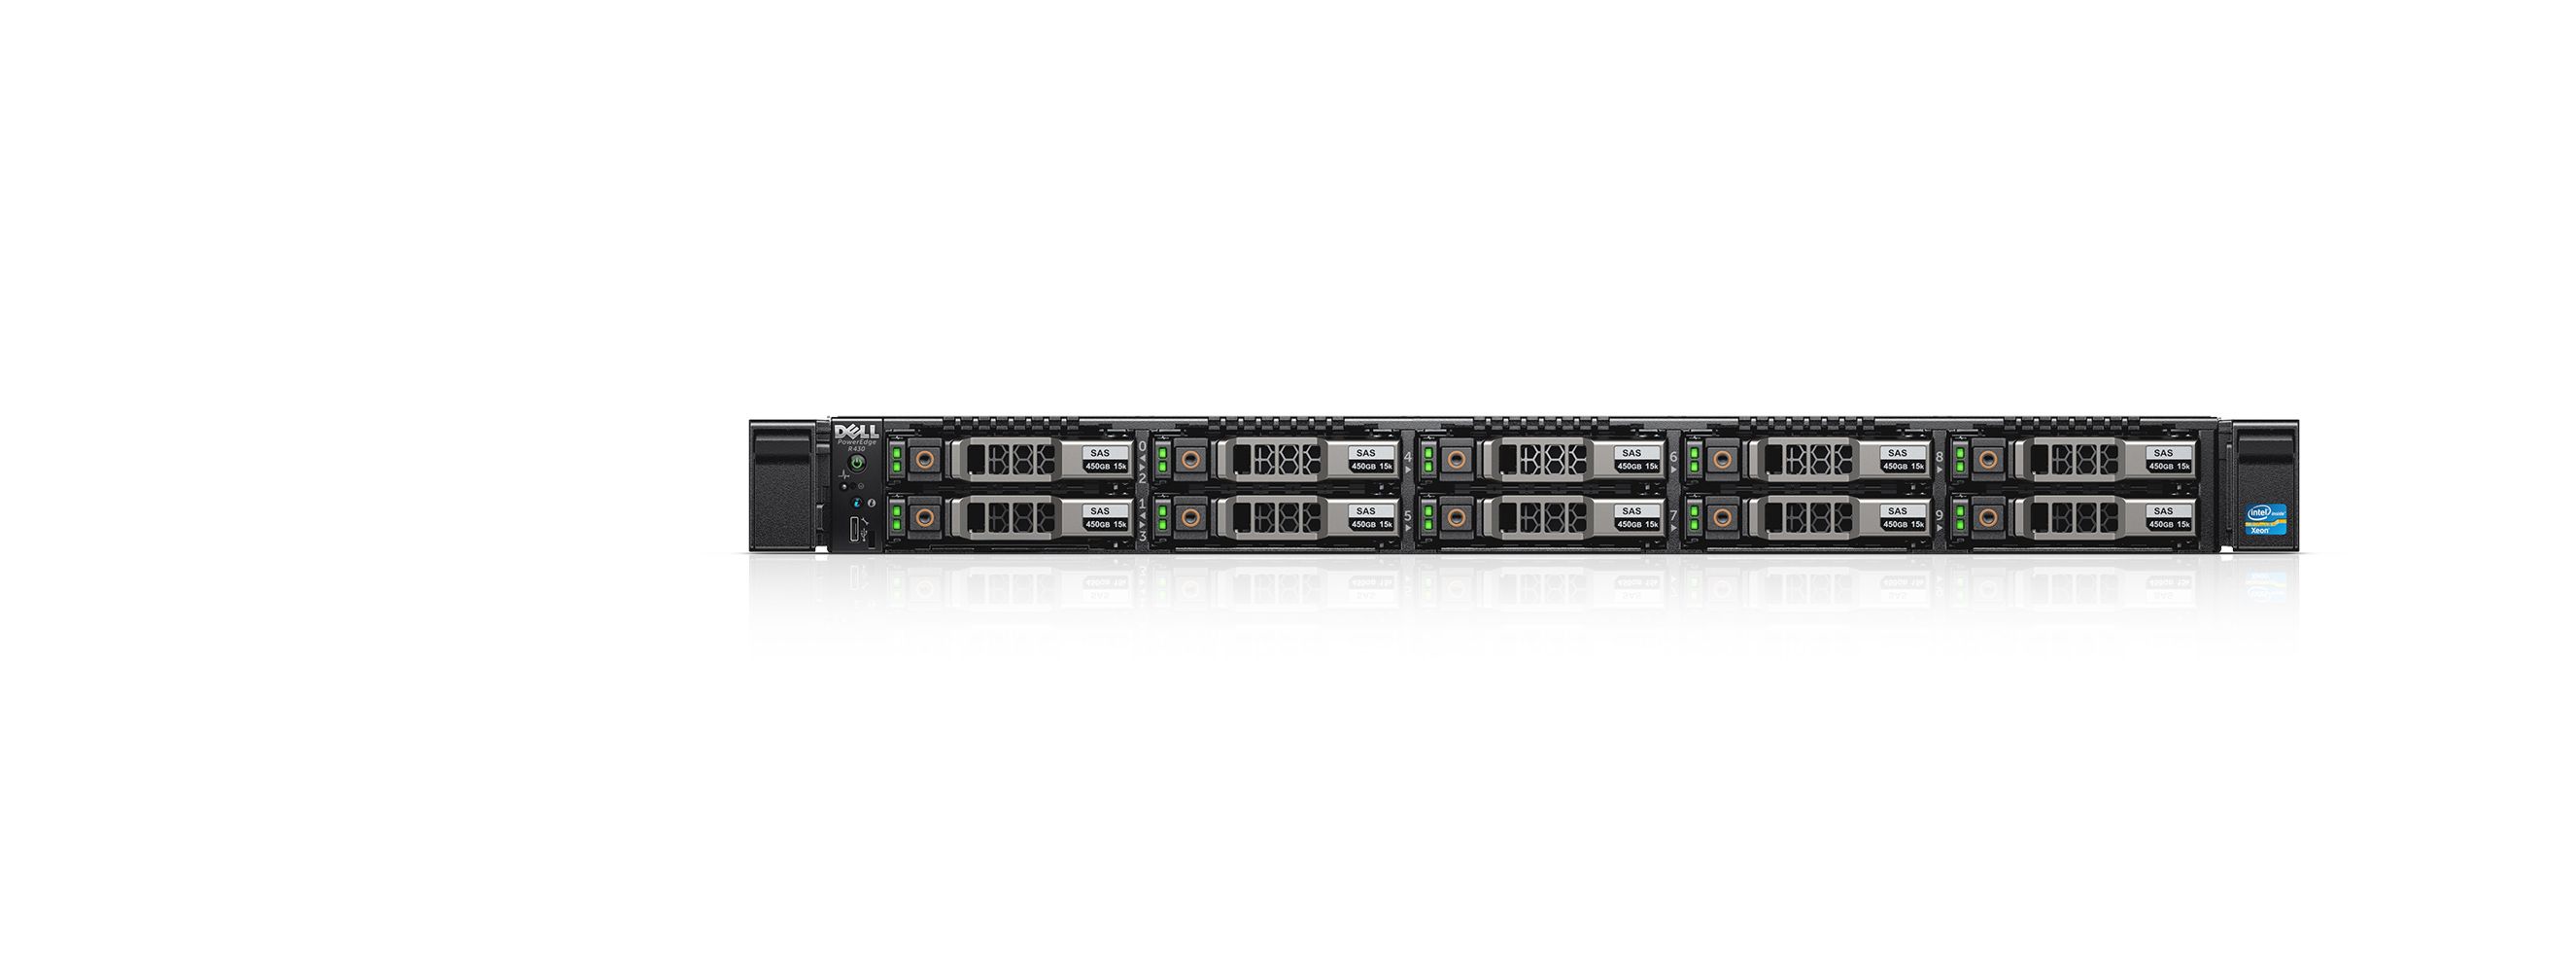 Dell PowerEdge R430 Server Chassis 3.5